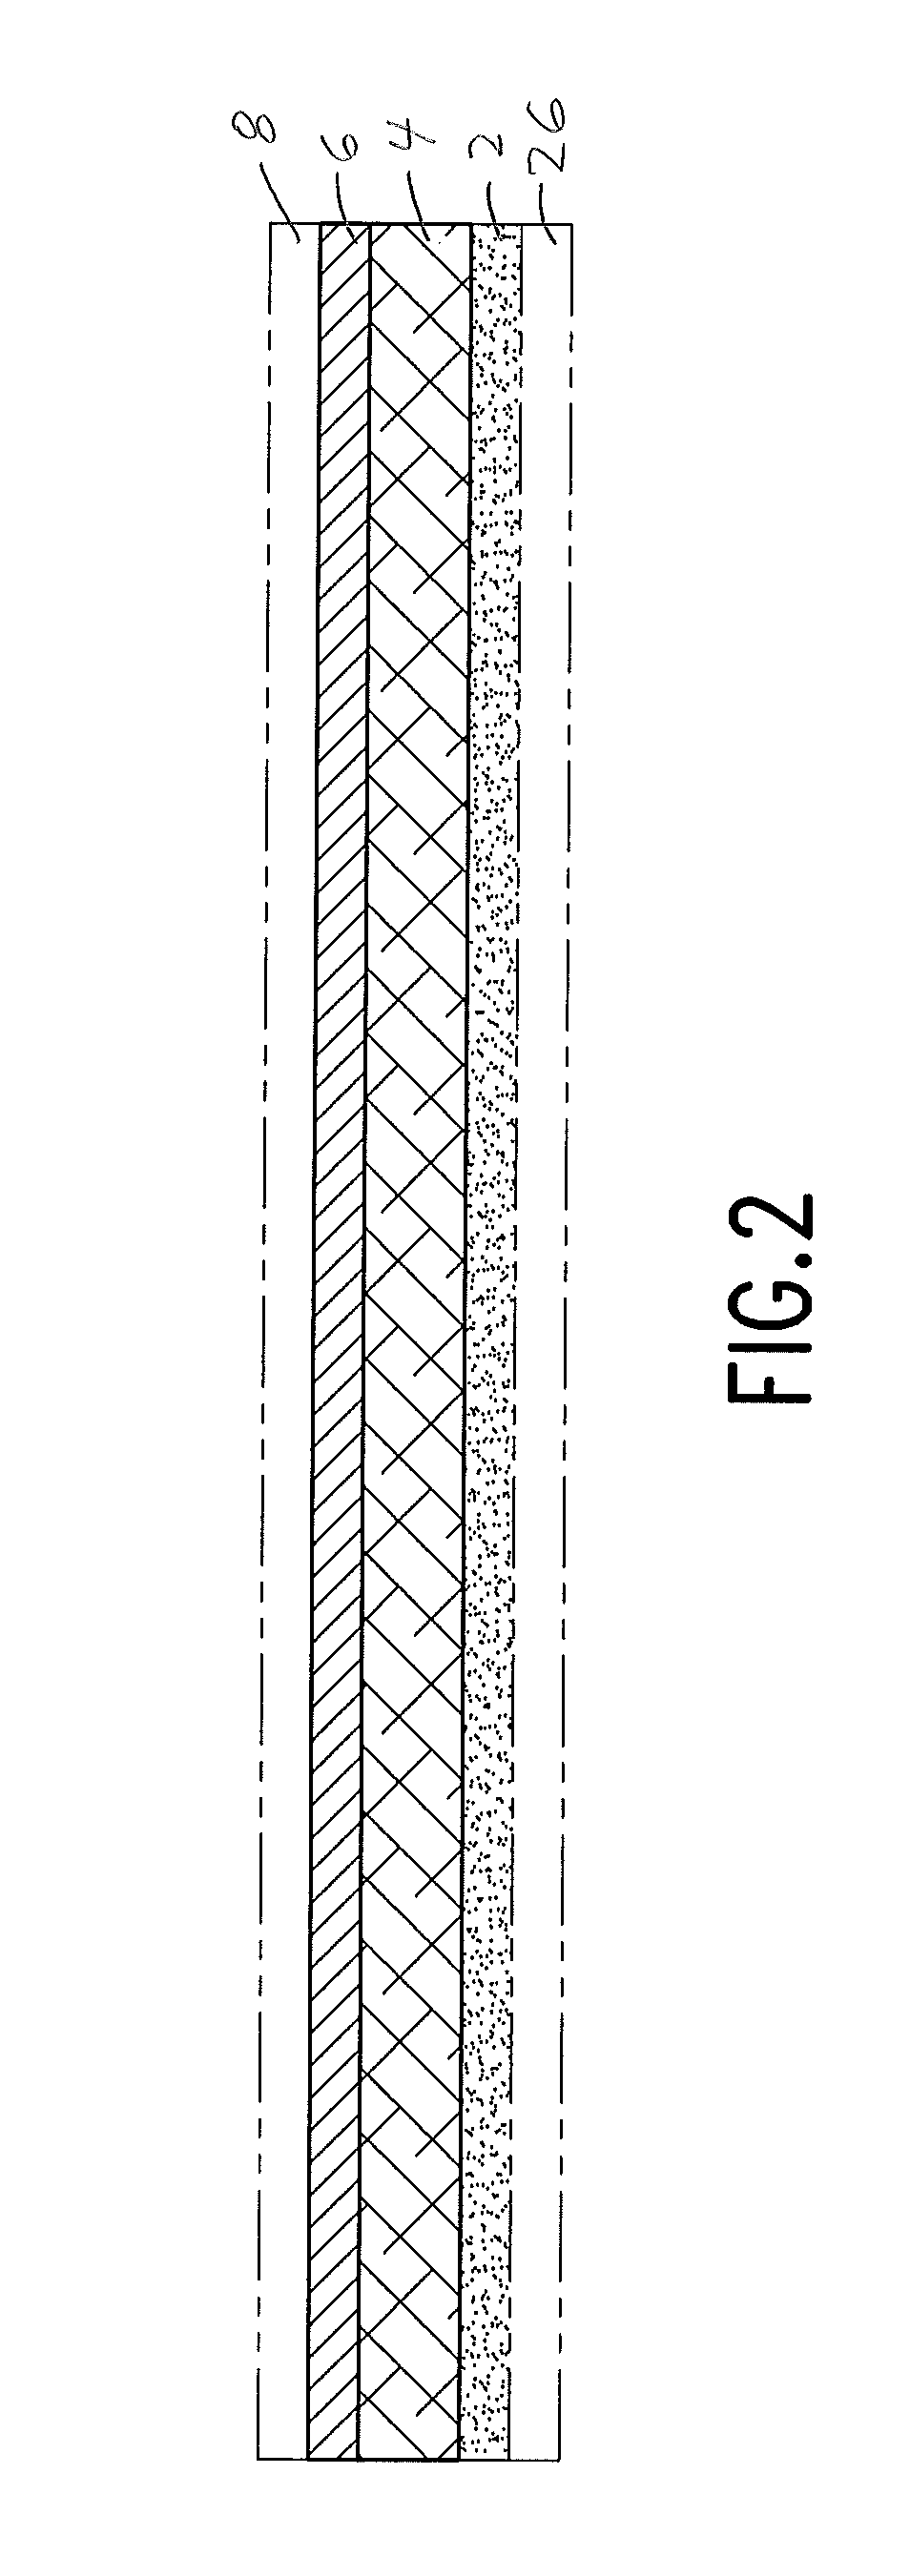 Metalized receiver/transfer media for printing and transfer process